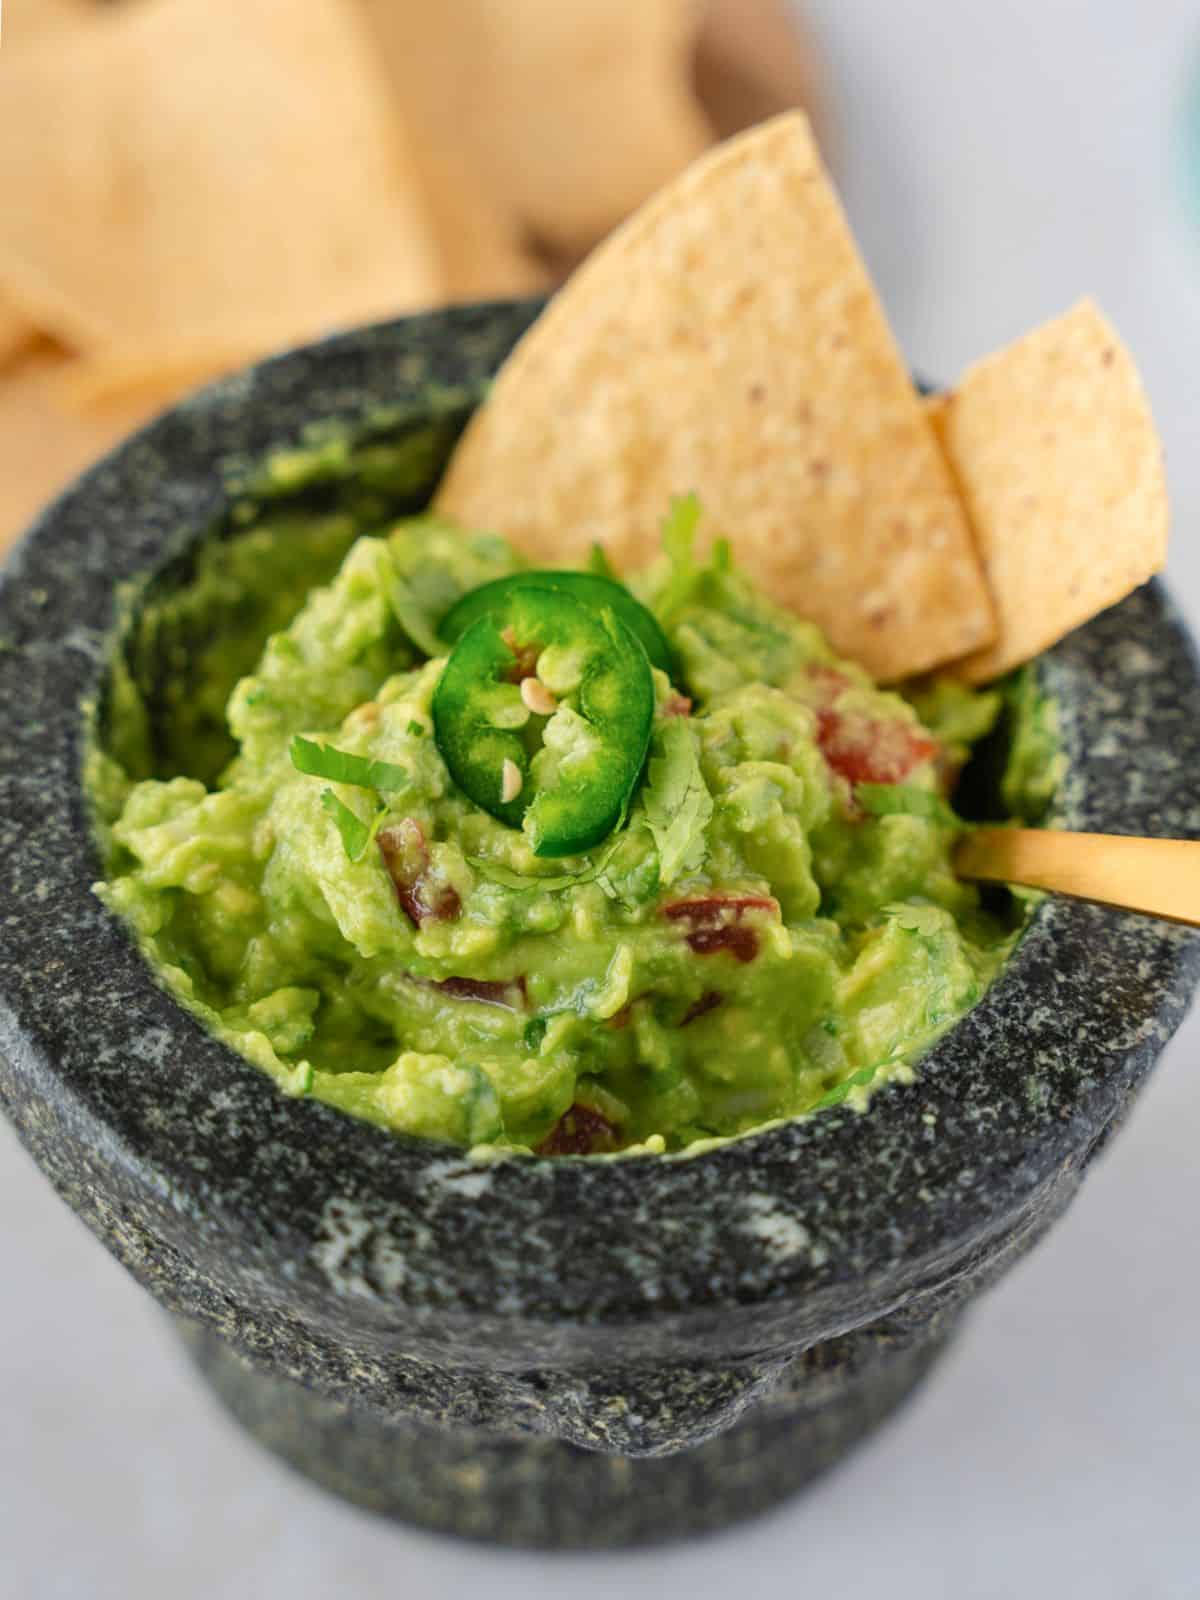 Up close view of guacamole in a molcajete topped with jalapeno slices and tortilla chips.